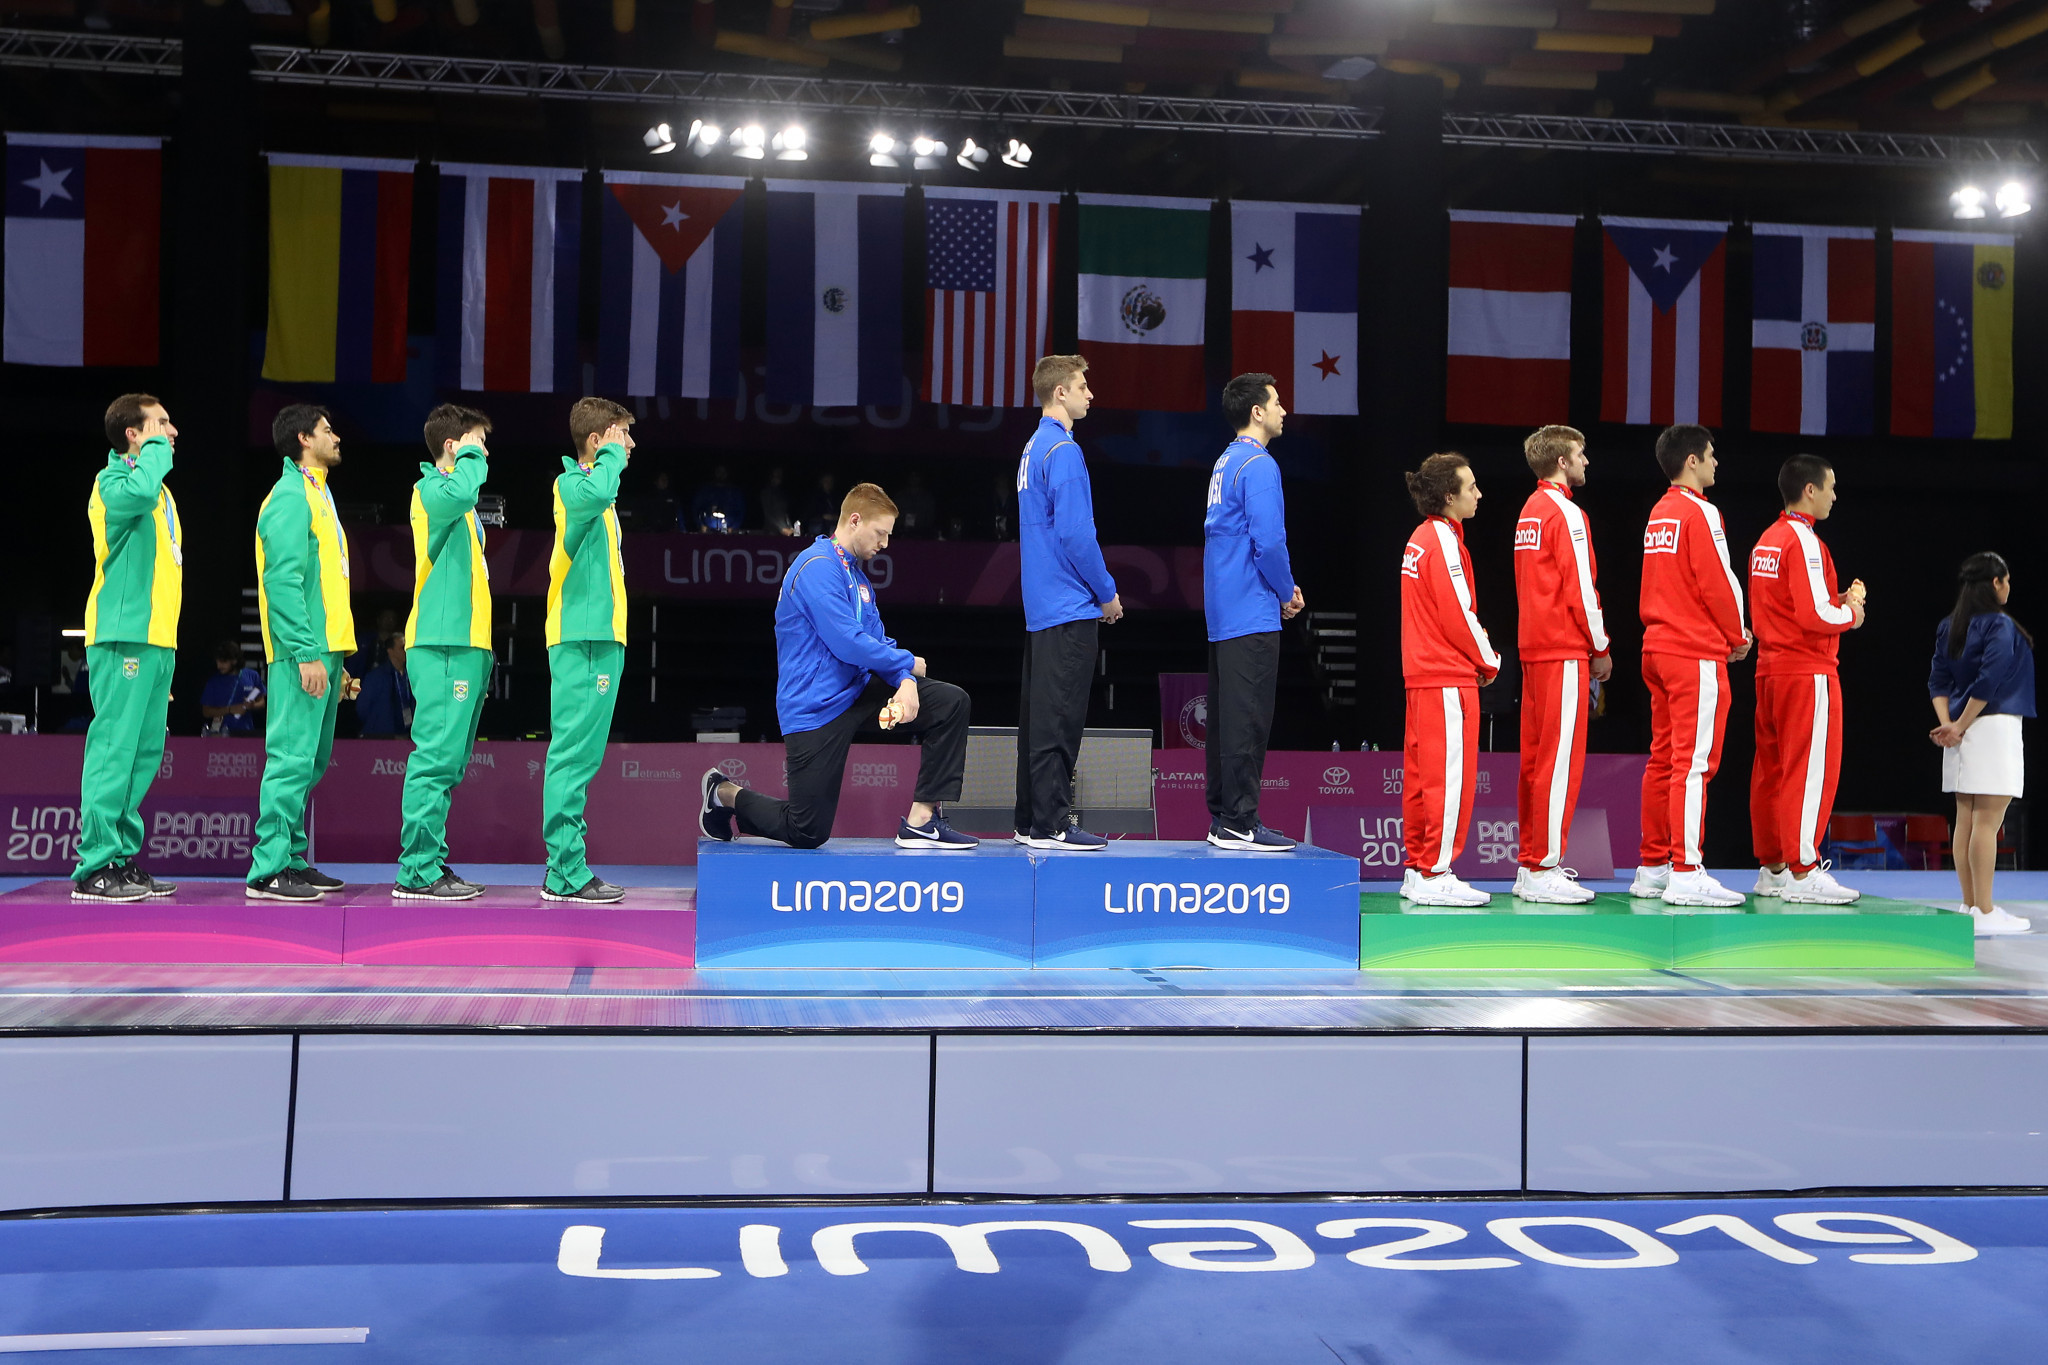 Race Imboden protested on the podium during the 2019 Pan American Games in Lima ©Getty Images